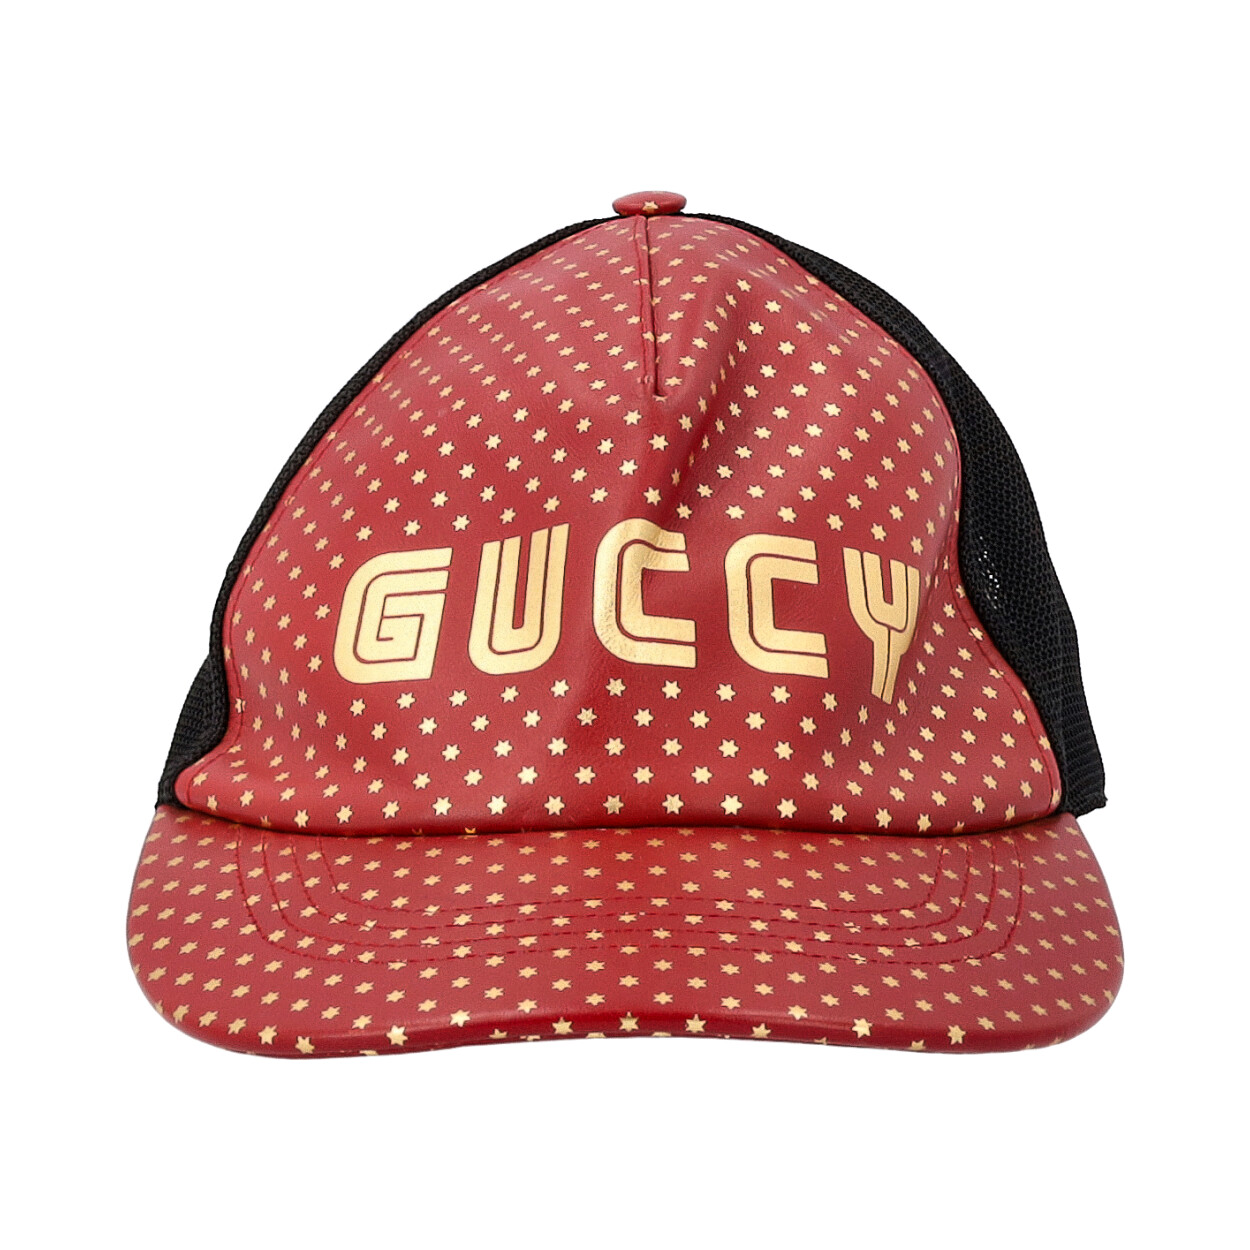 GUCCI Leather Guccy Baseball Cap Black/Red | Luxity